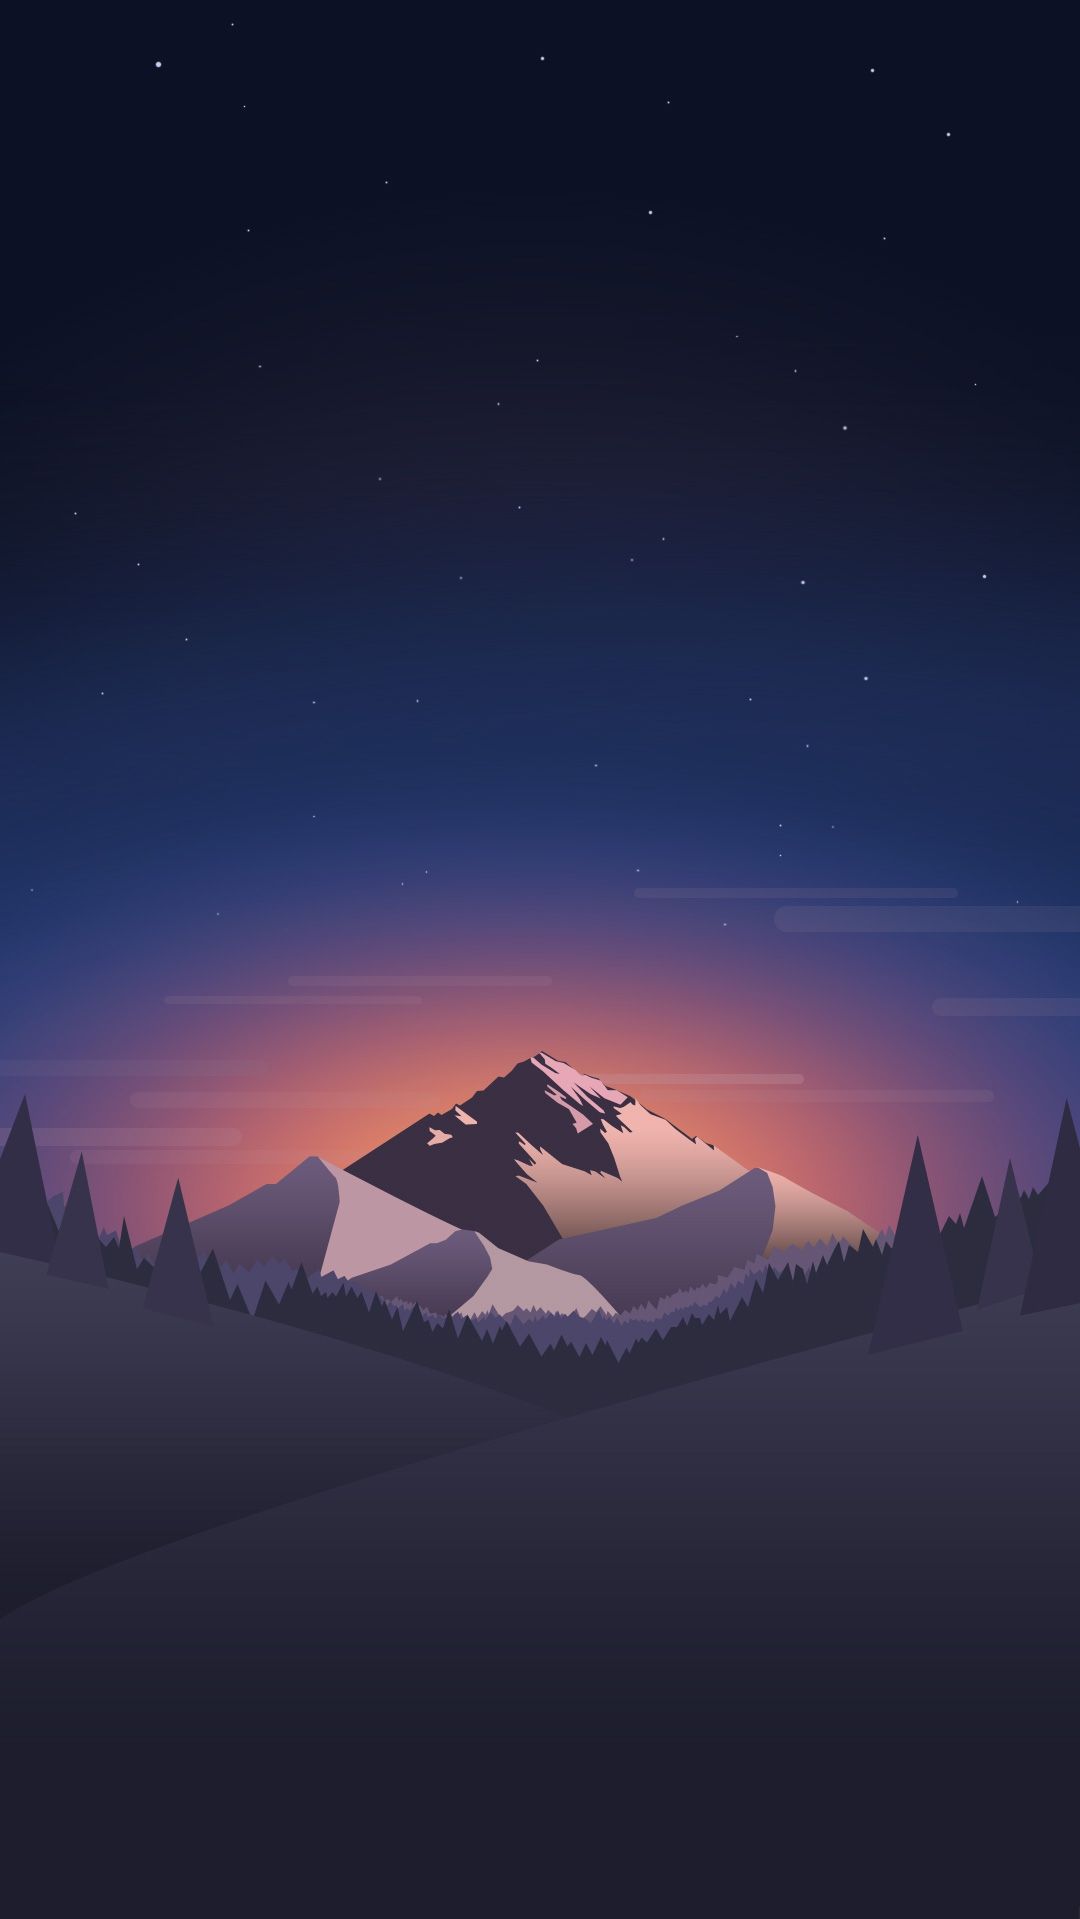 Digital Minimal Mountains Forest Night iPhone Wallpaper